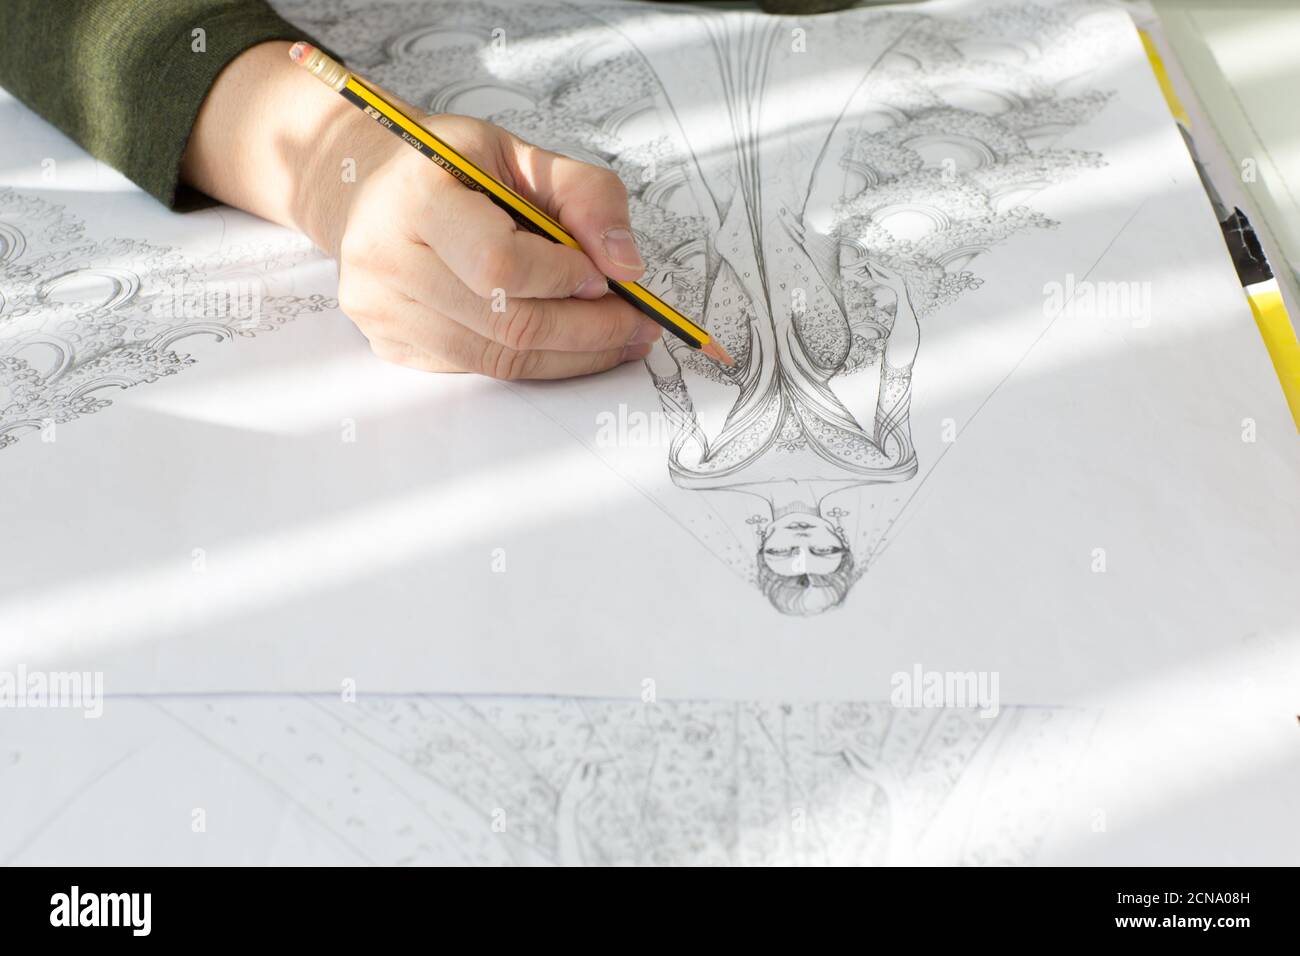 Fashion designer's hand sketching a haute couture wedding dress with a pencil on drawing paper. Stock Photo